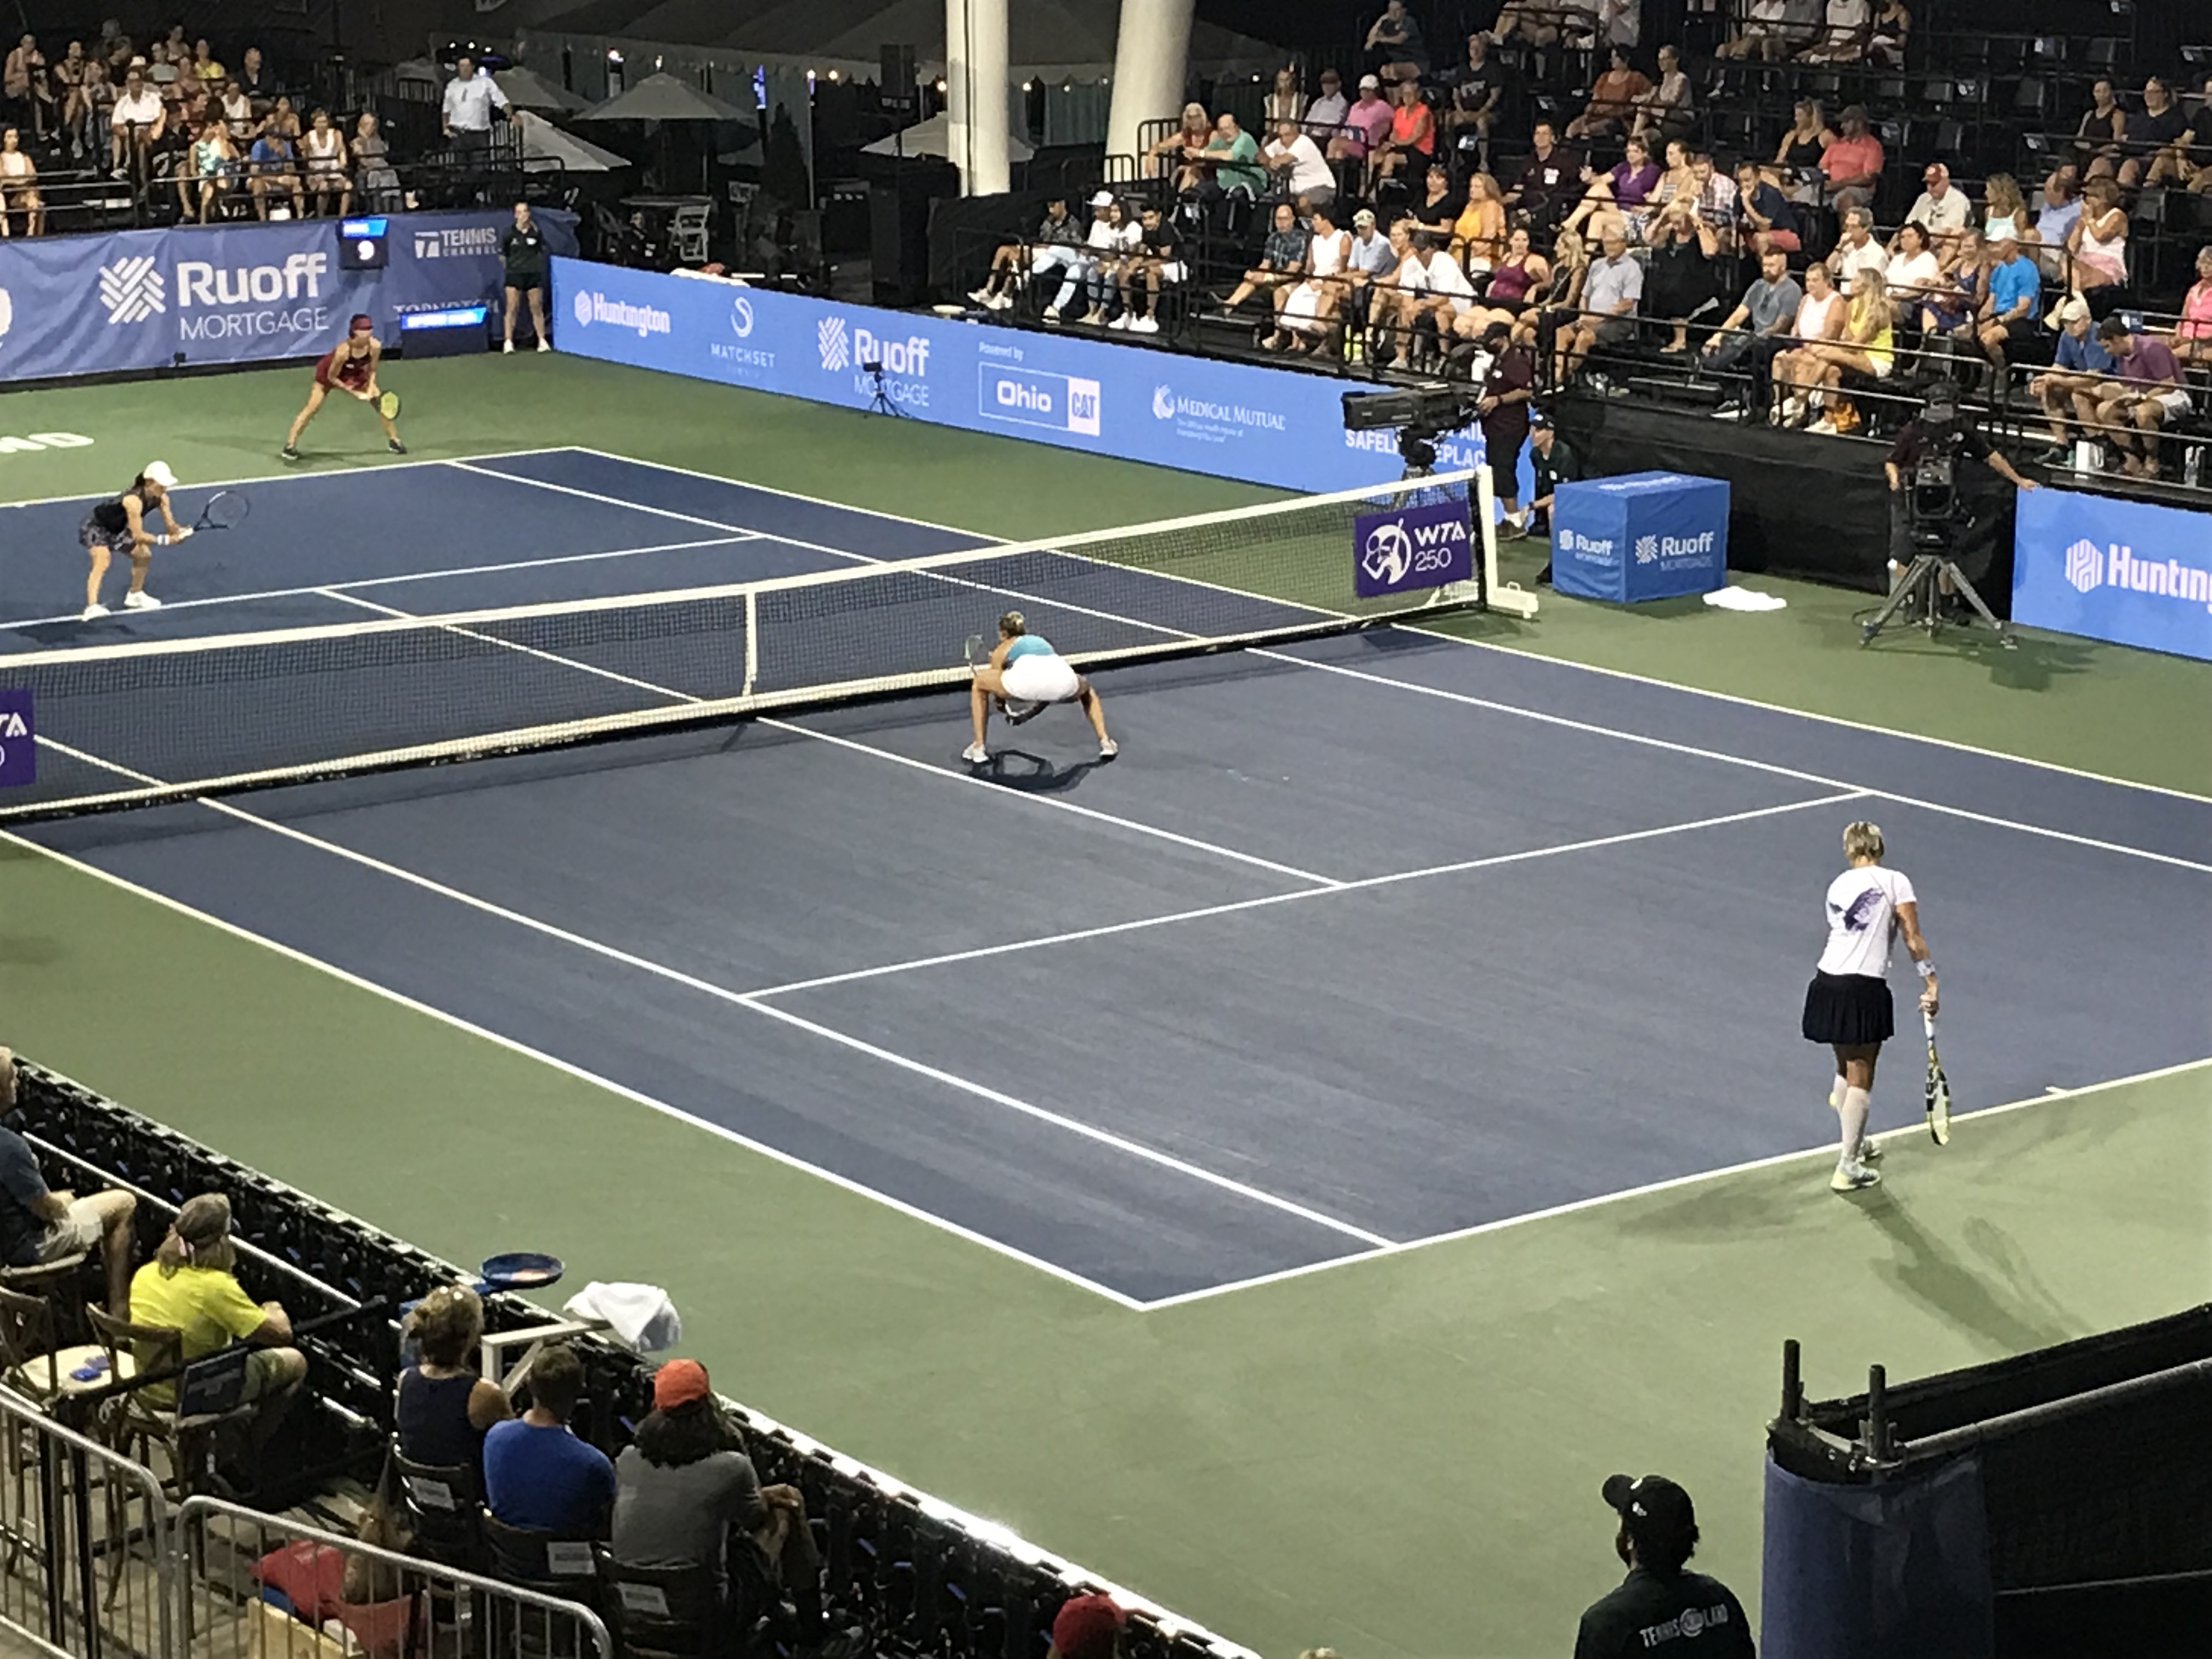 Tennis in the Land returning to Cleveland for 2nd annual event